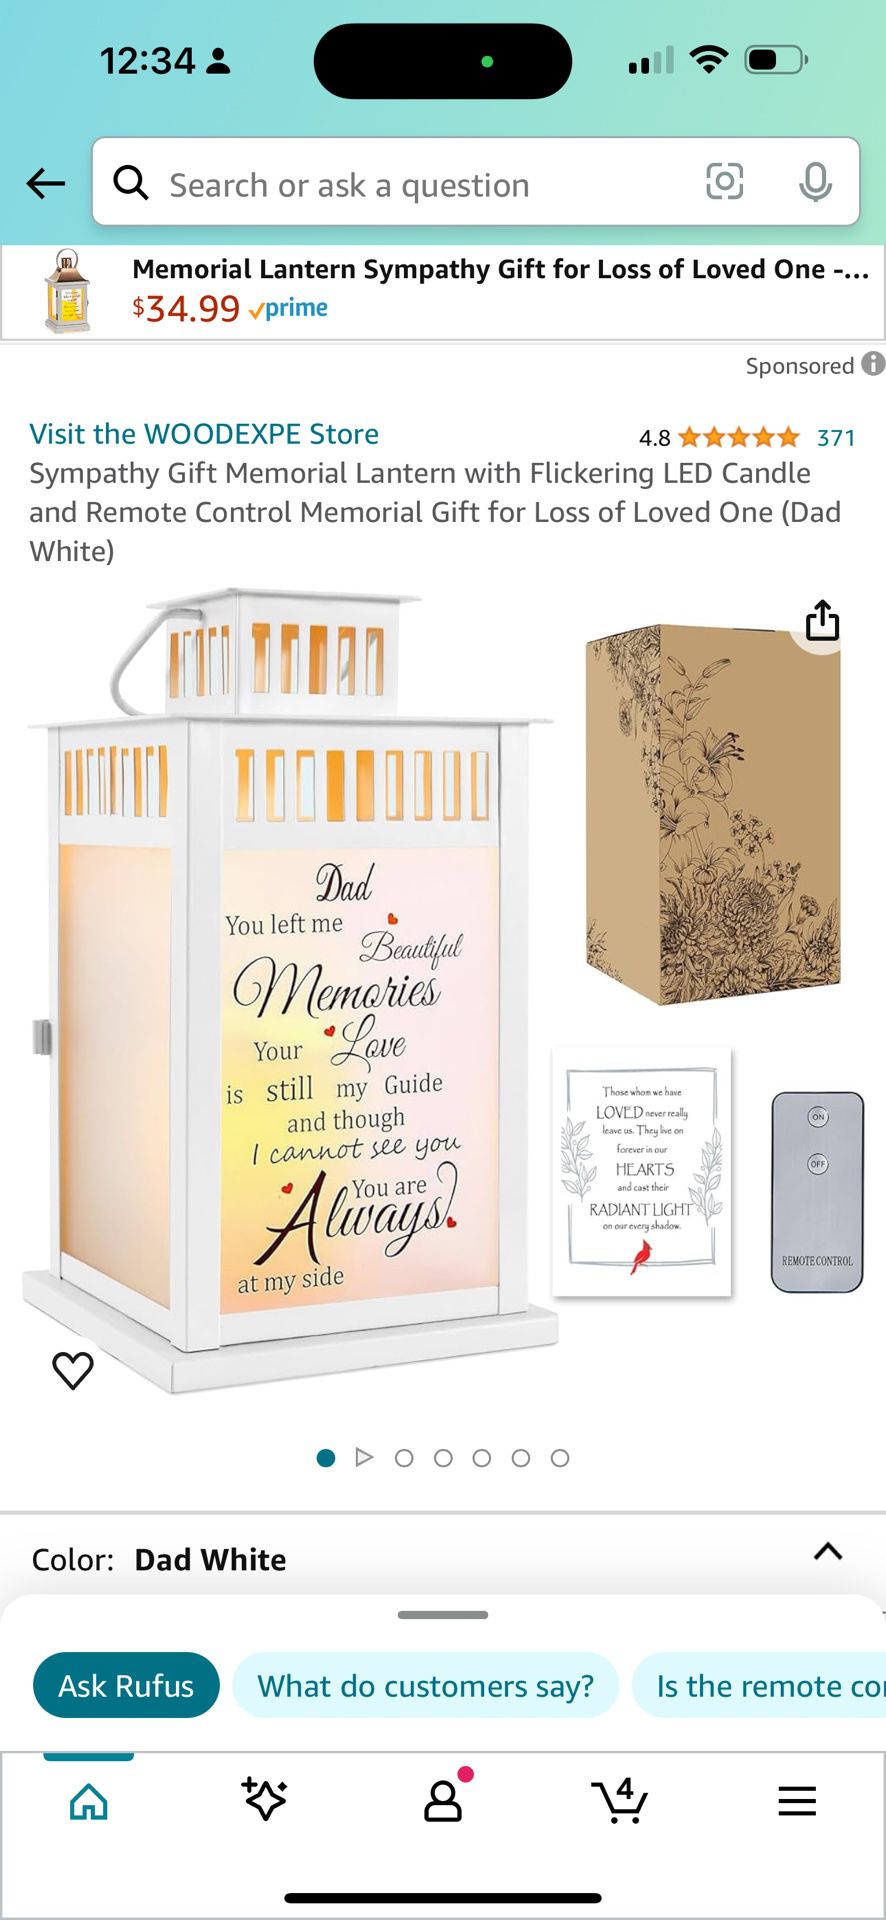 Sympathy Gift Memorial Lantern with Flickering LED Candle and Remote Control Memorial Gift for Loss of Loved One (Dad White)